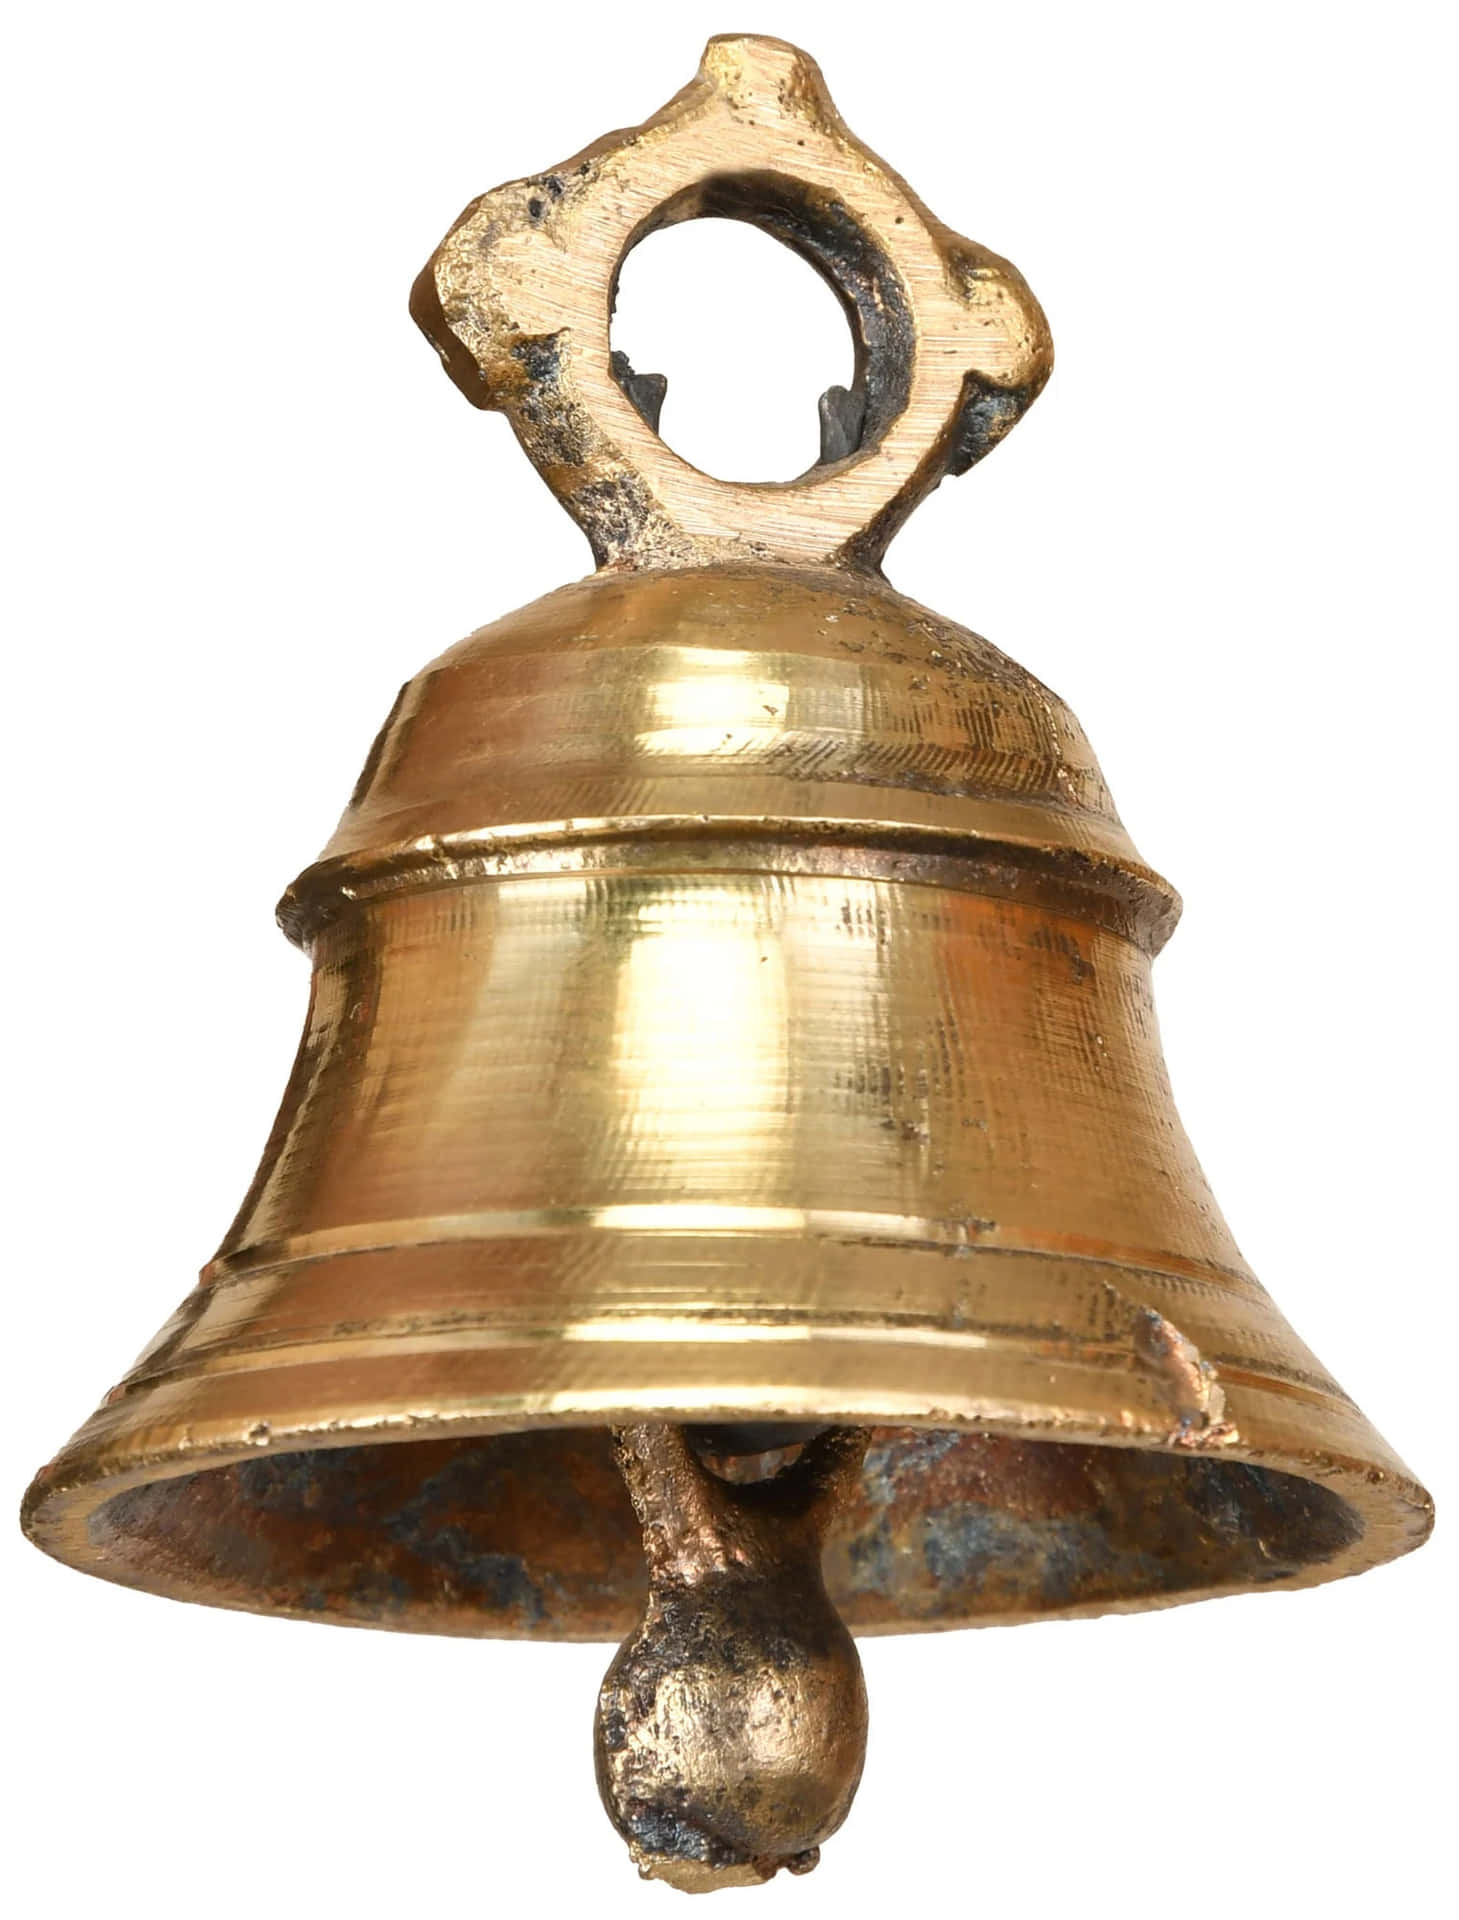 Hear the bell toll as a symbol of progress